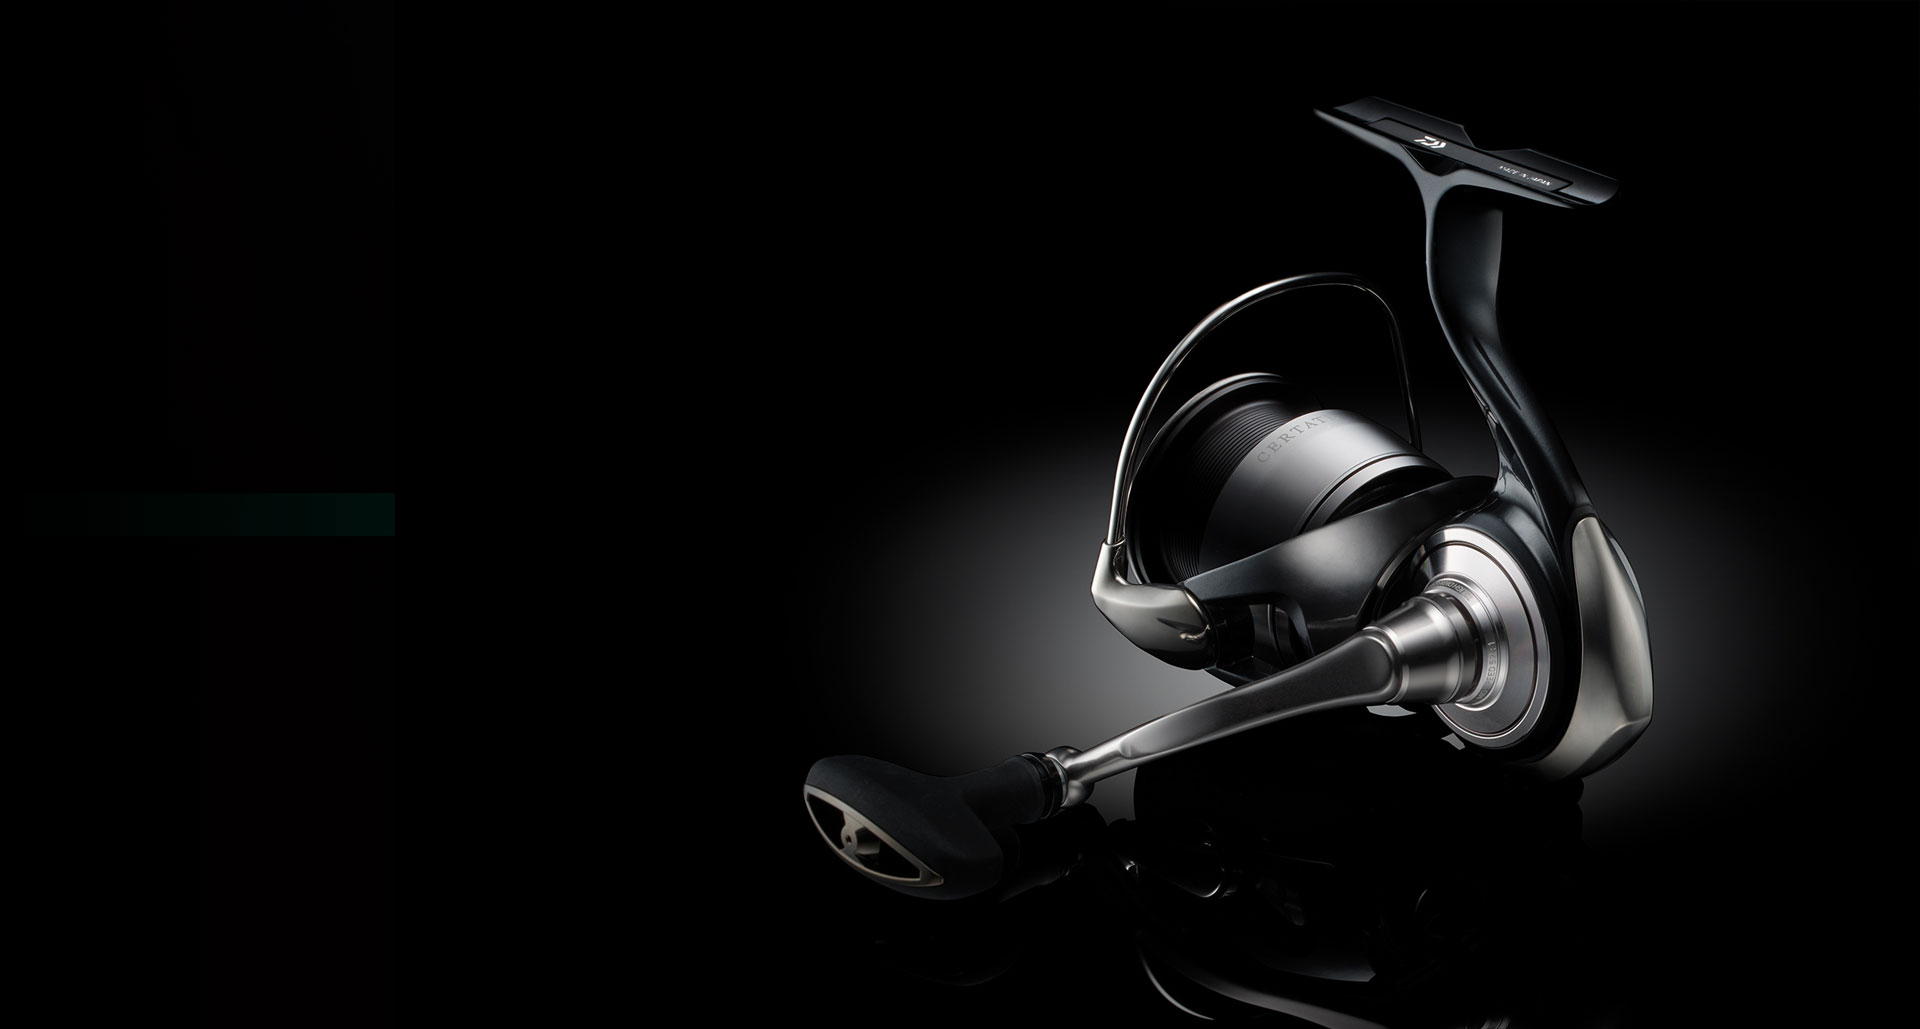 Here It Comes! Strong, Rigid and Tough DAIWA 24 CERTATE Is Renewed!